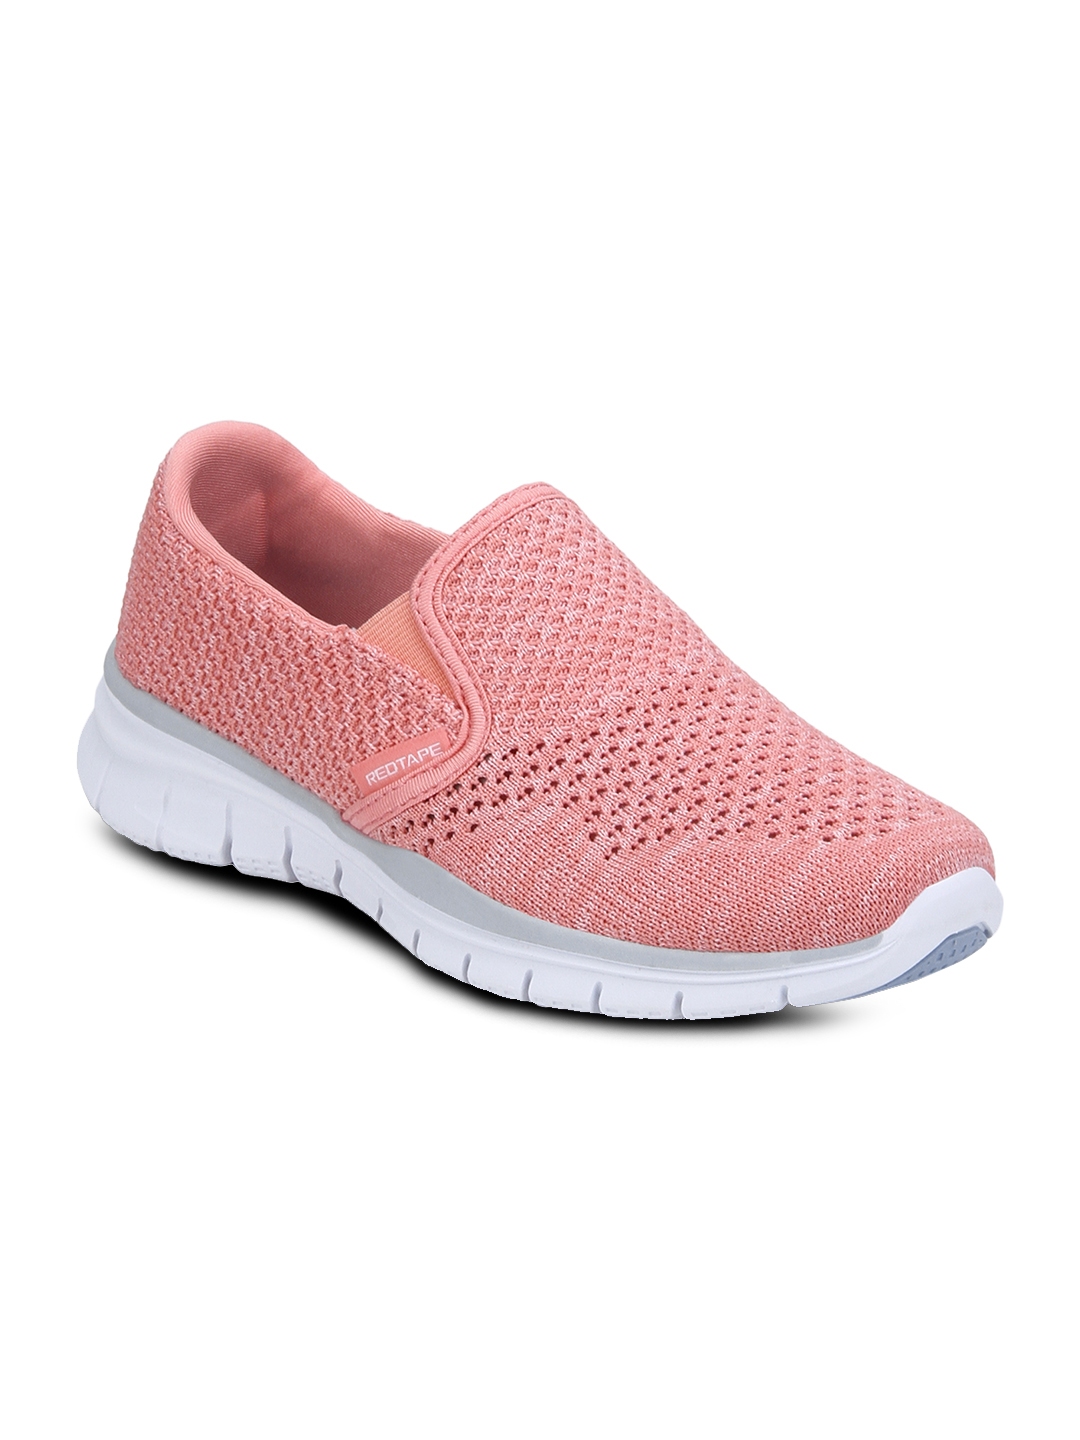 Buy Red Tape Women Pink Walking Shoes - Sports Shoes for Women 5844278 ...